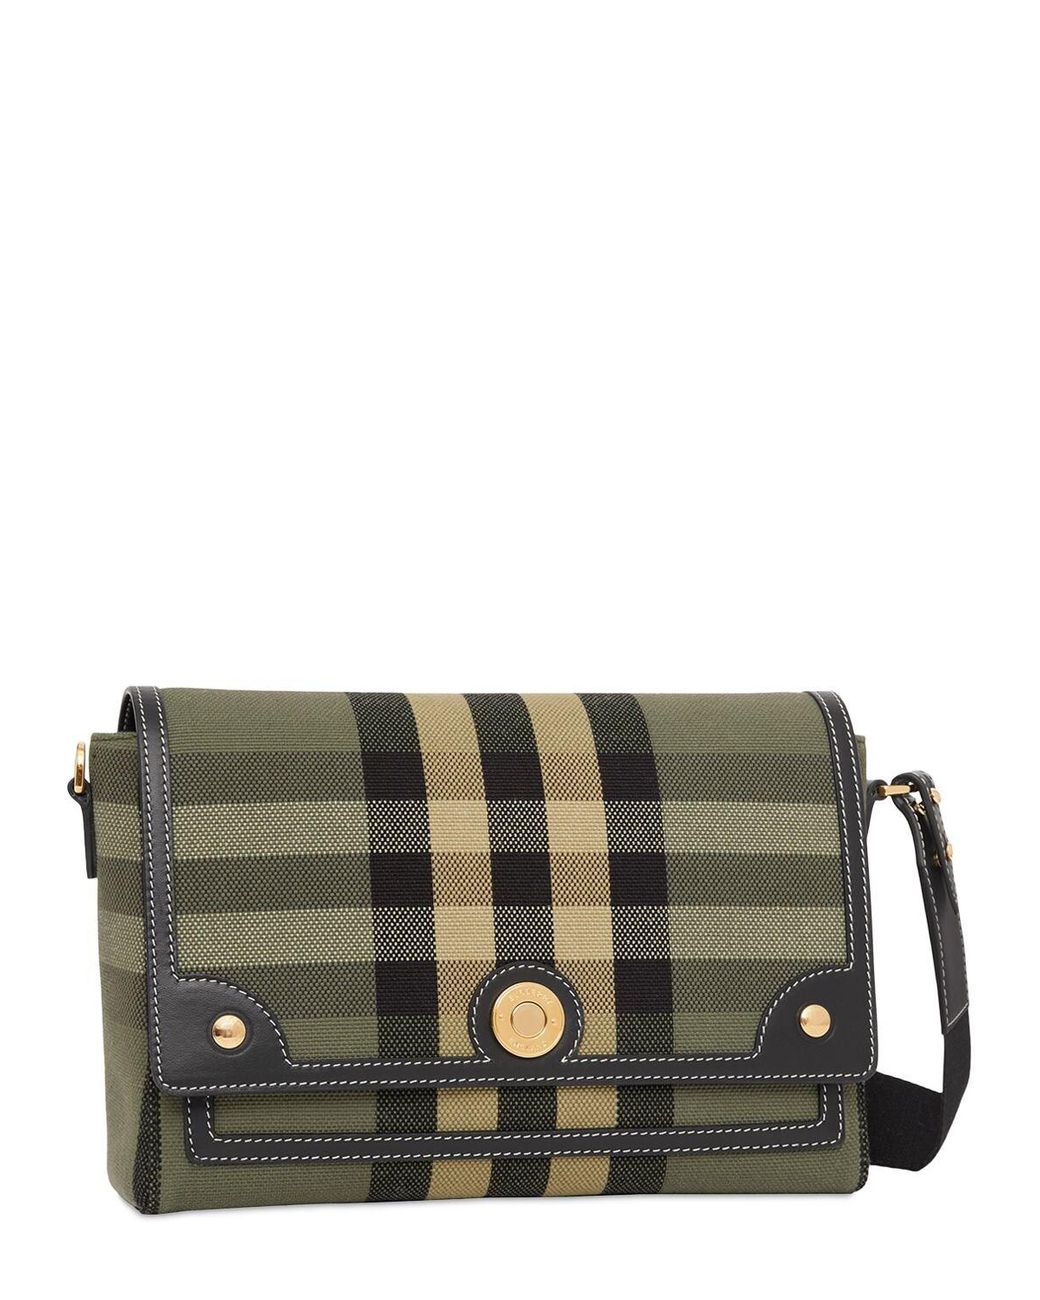 Burberry Medium Note Check Cotton Shoulder Bag in Green | Lyst